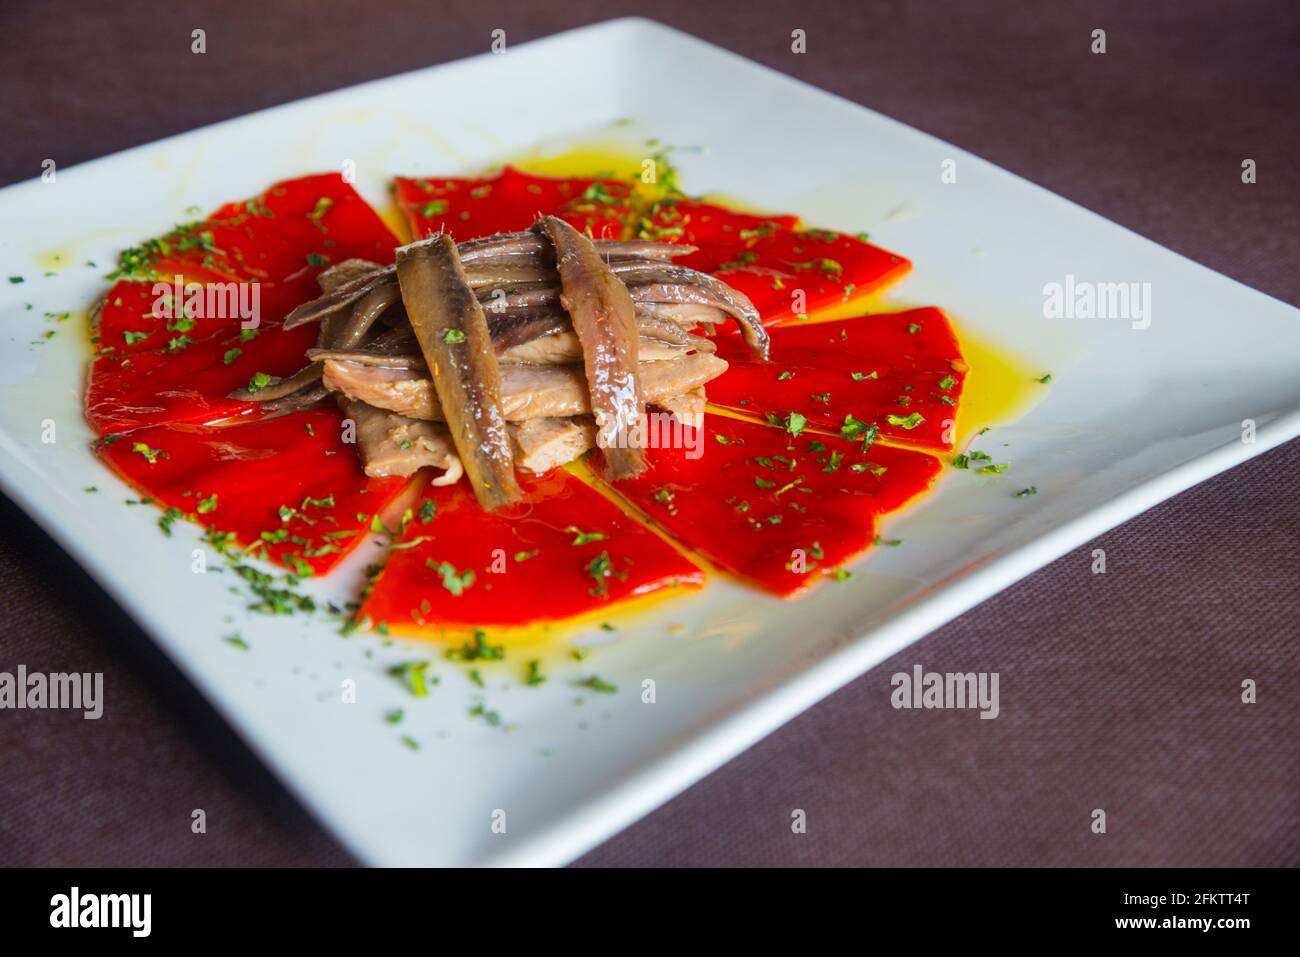 Salad made of Piquillo peppers, tuna loin, anchovy fillets, parsley and olive oil. Spain. Stock Photo